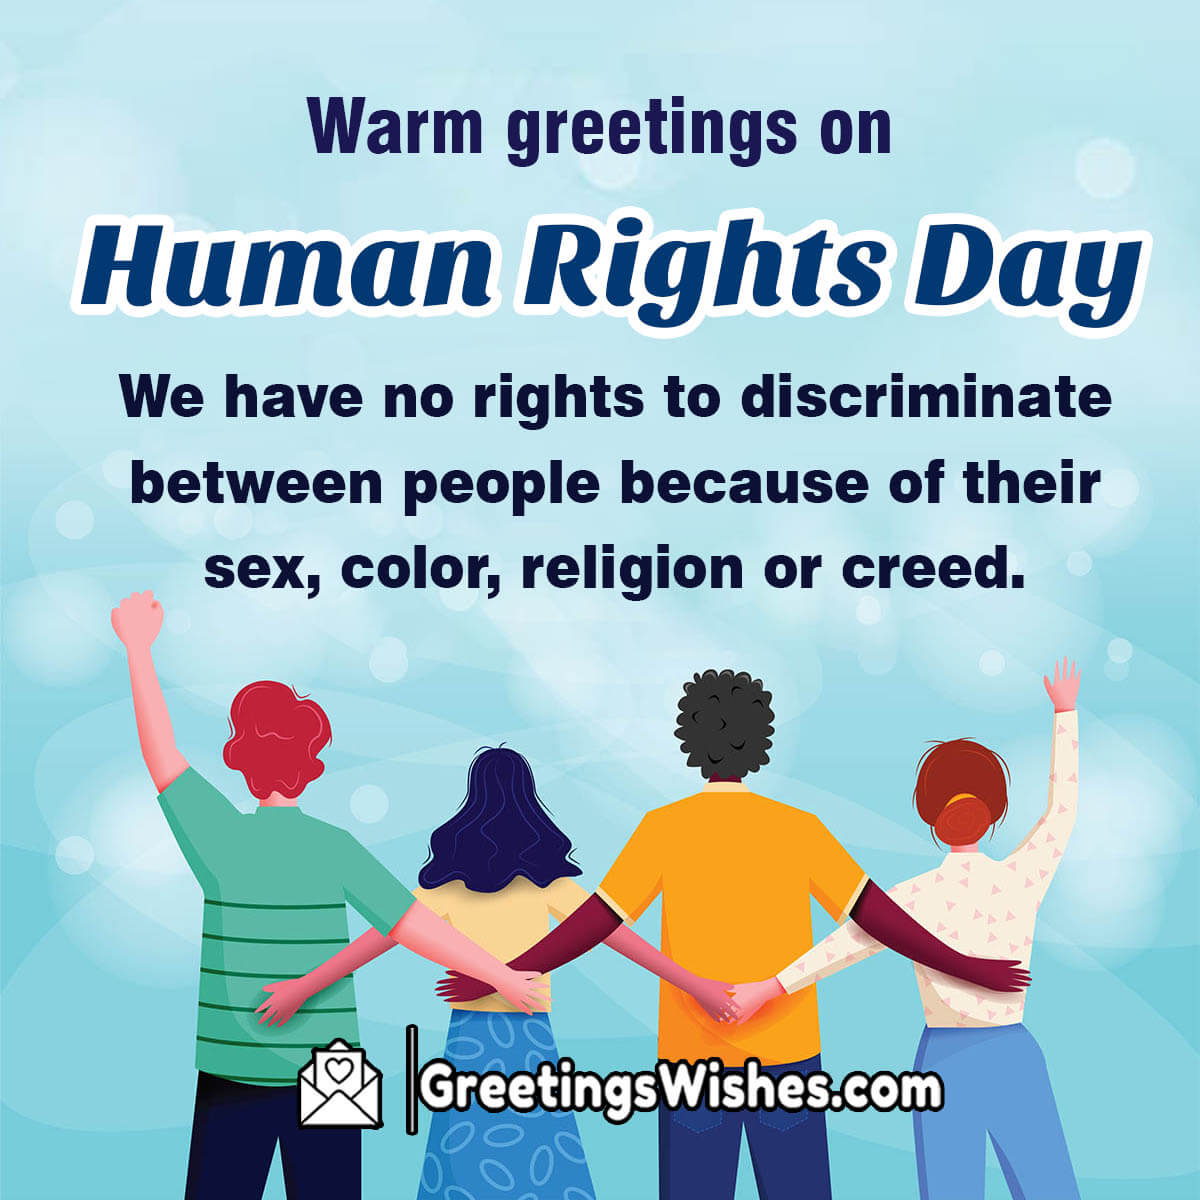 Human Rights Day Greetings